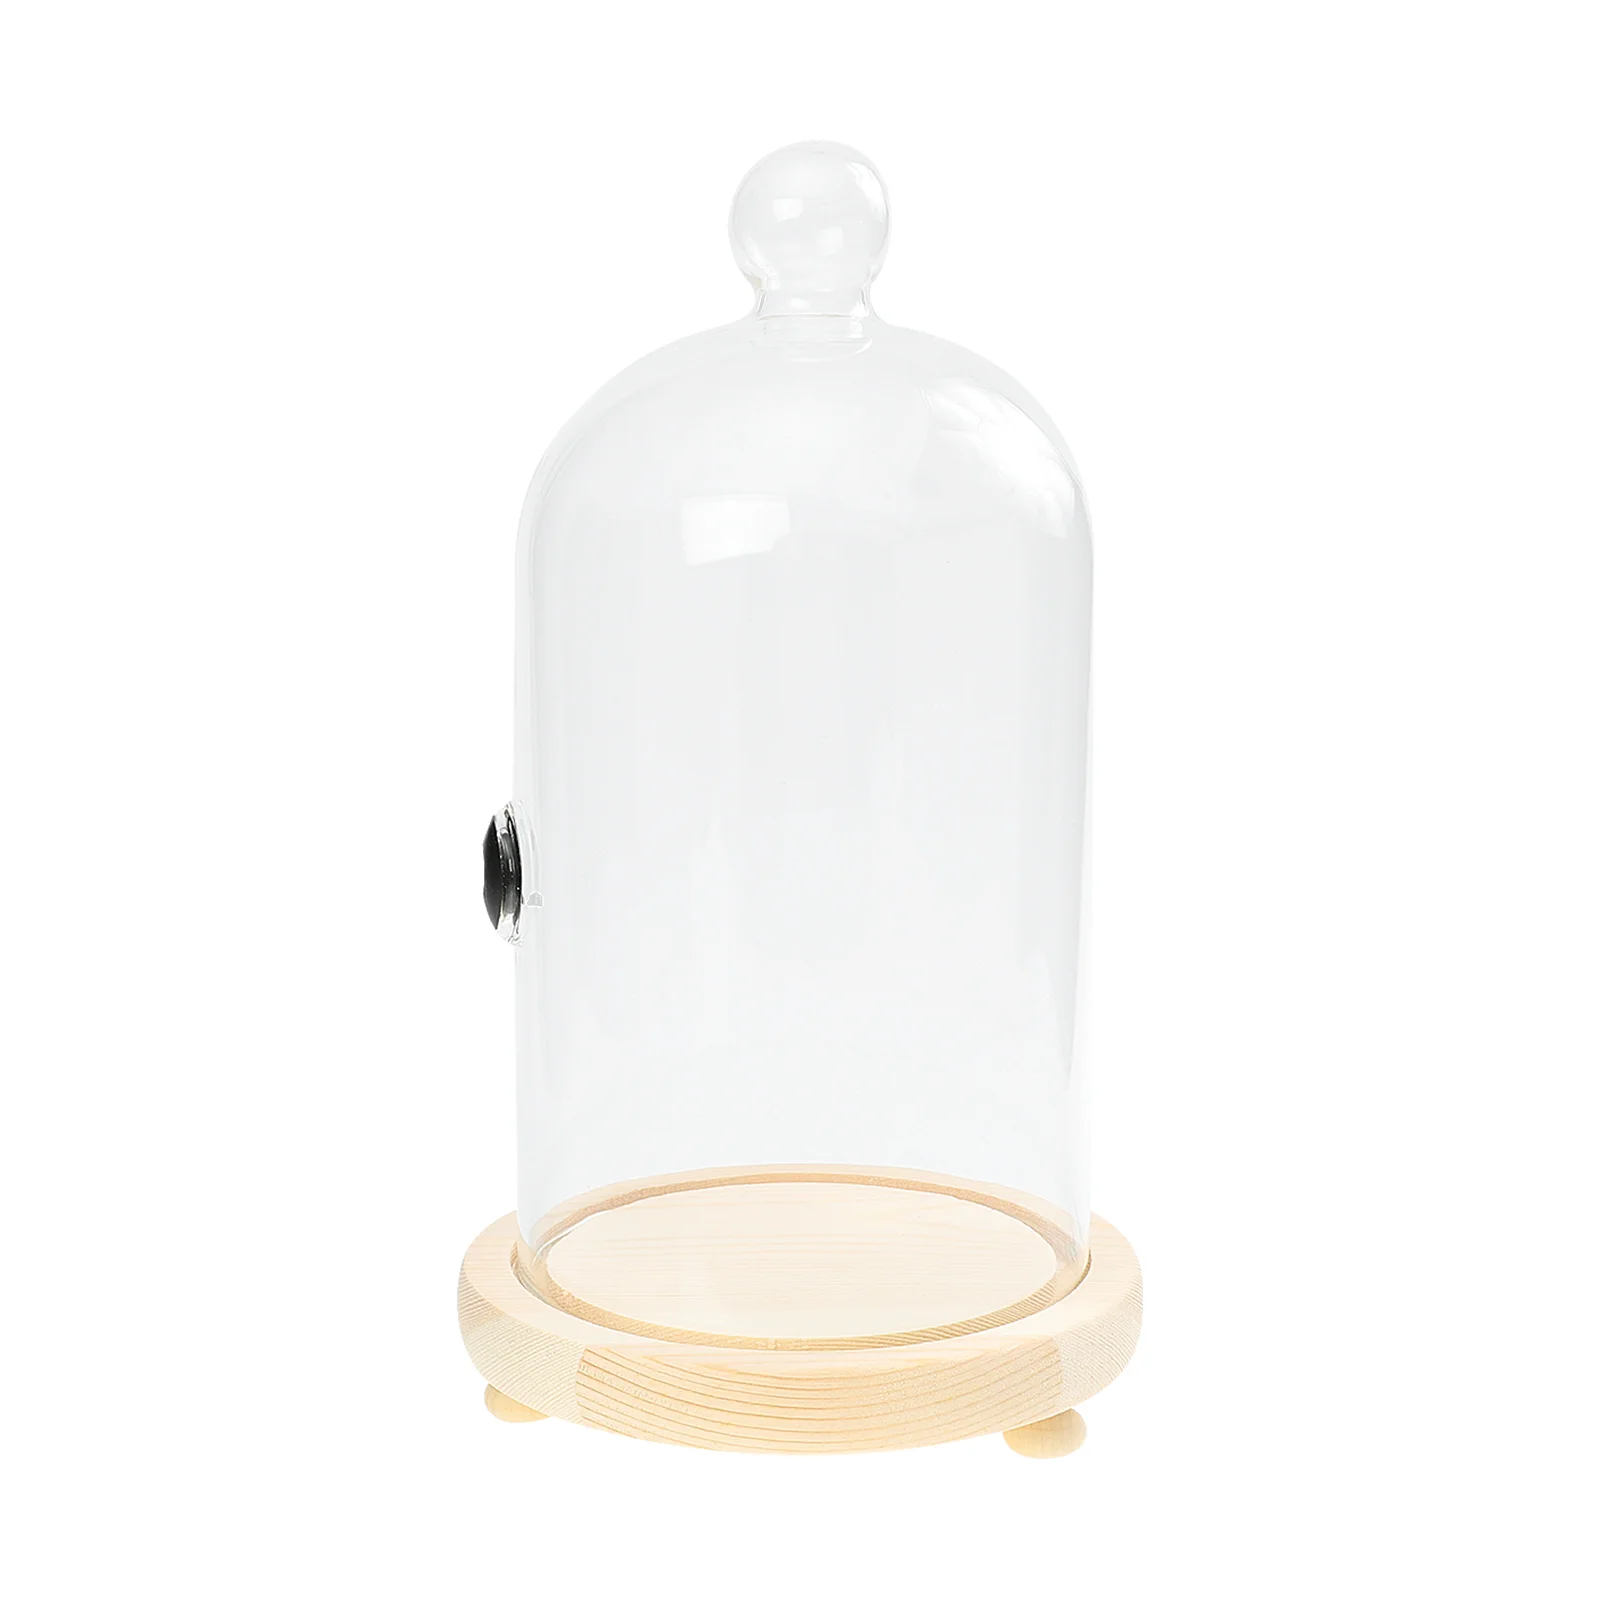 

Dome Cover Food Cake Cloche Display Lid Smoker Infuser Dessert Cocktail Stand Bell Plate Jar Dish Tray Butter Clear Cupcake